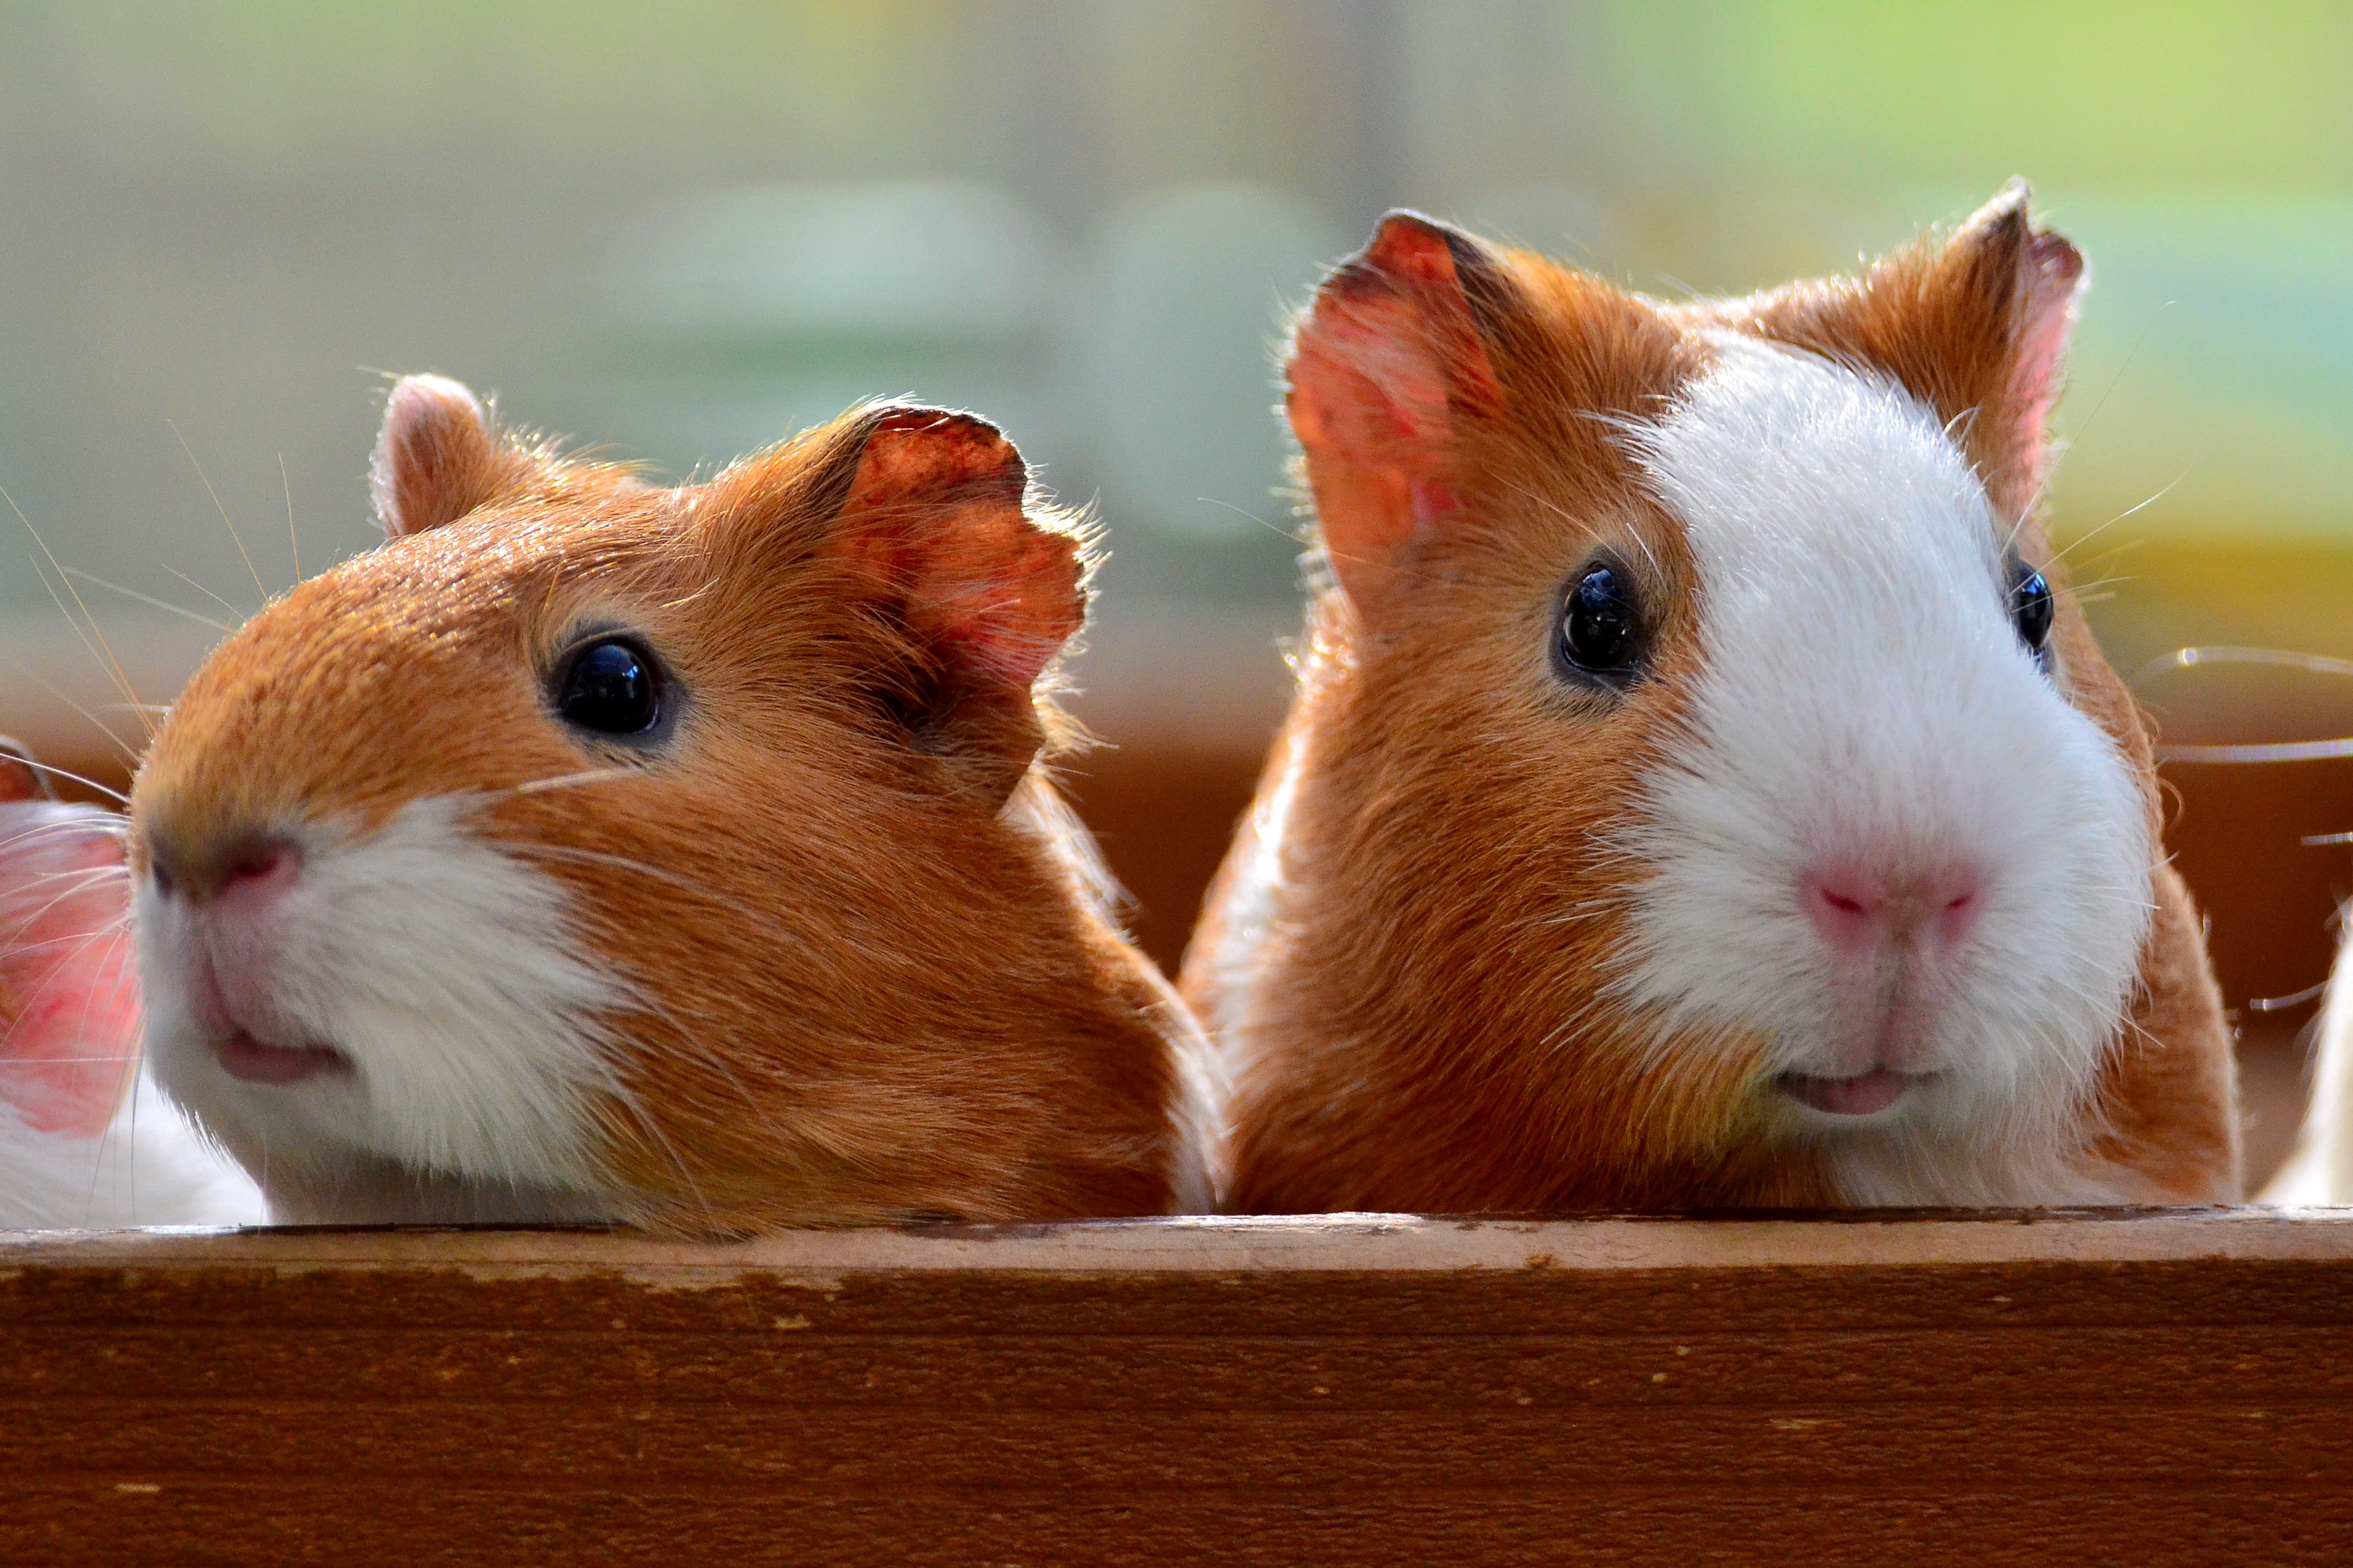 Guinea pigs on box during daytime